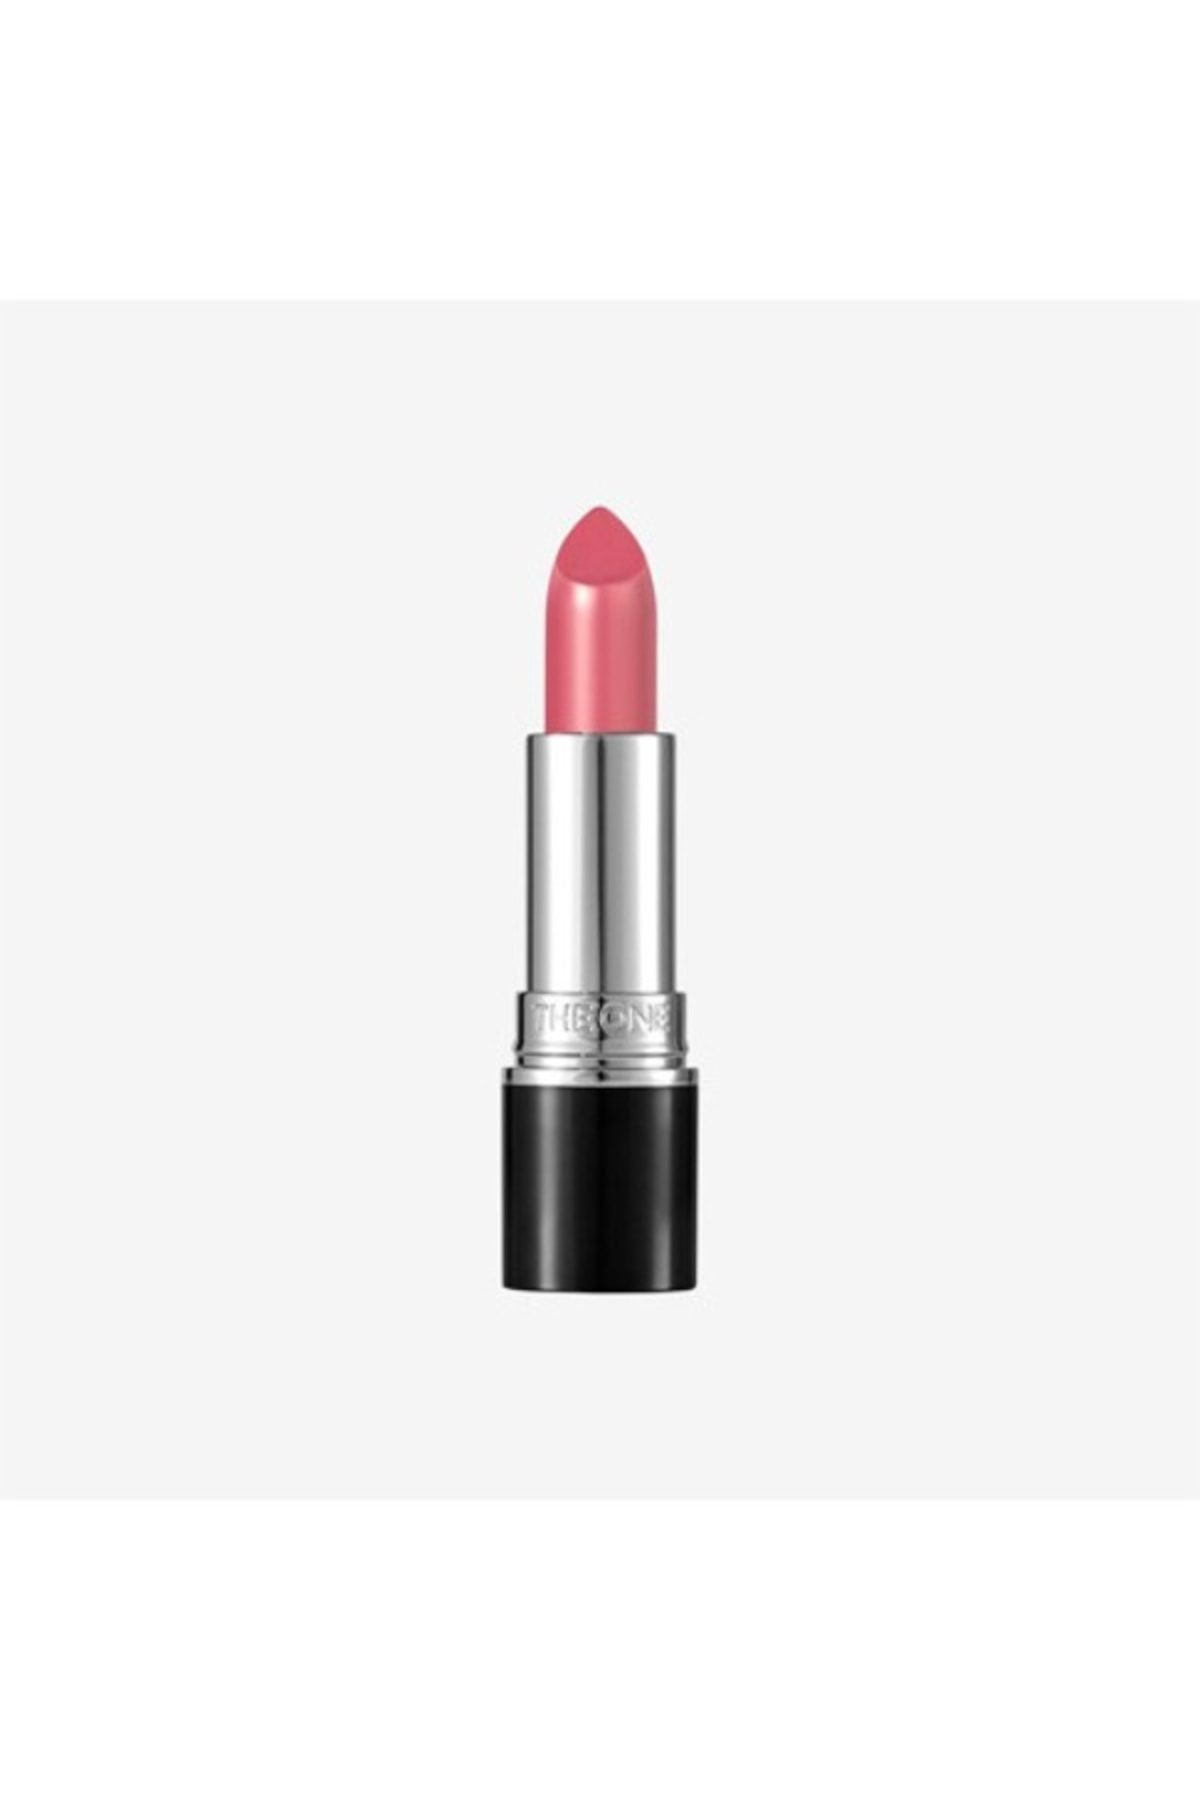 Oriflame The One Colour Stylist Ultimate Ruj Rose Pout 3,8g- 37654